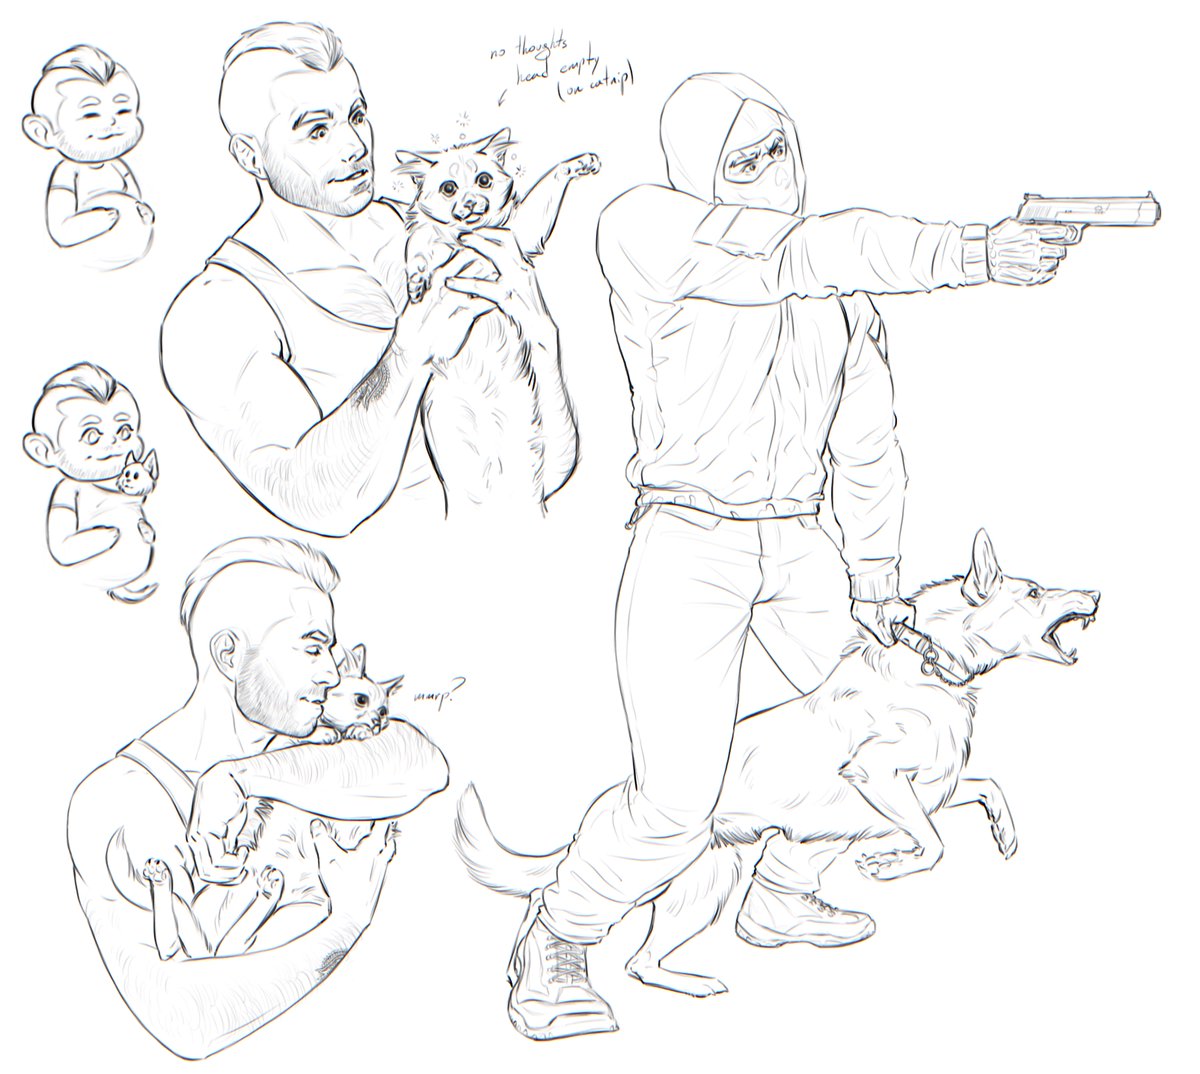 Some doodles done while I was in between deadlines

#MWII #MWIII #CallofDuty #SimonGhostRiley #JohnSoapMacTavish #soapghost #GhostSoap #rileythedog